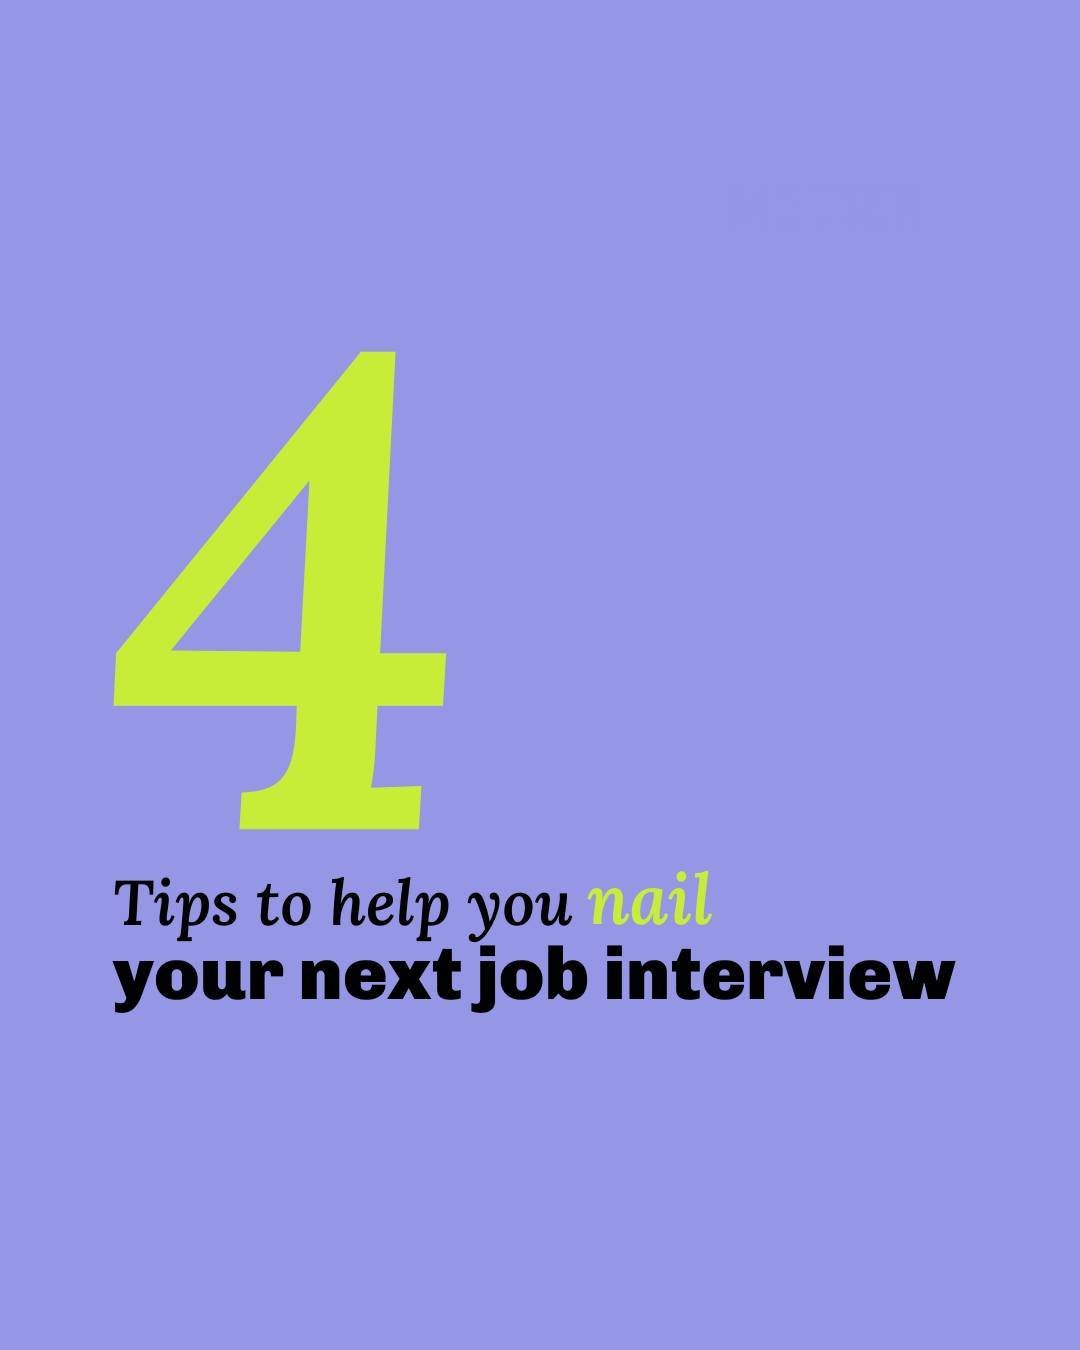 We know interviewing for a job can be intimidating. That's why it's so important to go in feeling prepared. ⁠
⁠
Here are 4 expert tips to help you nail your next interview &mdash; you can thank us later 🎯⁠
⁠
&bull;⁠
&bull;⁠
&bull;⁠
&bull;⁠
&bull;⁠
&